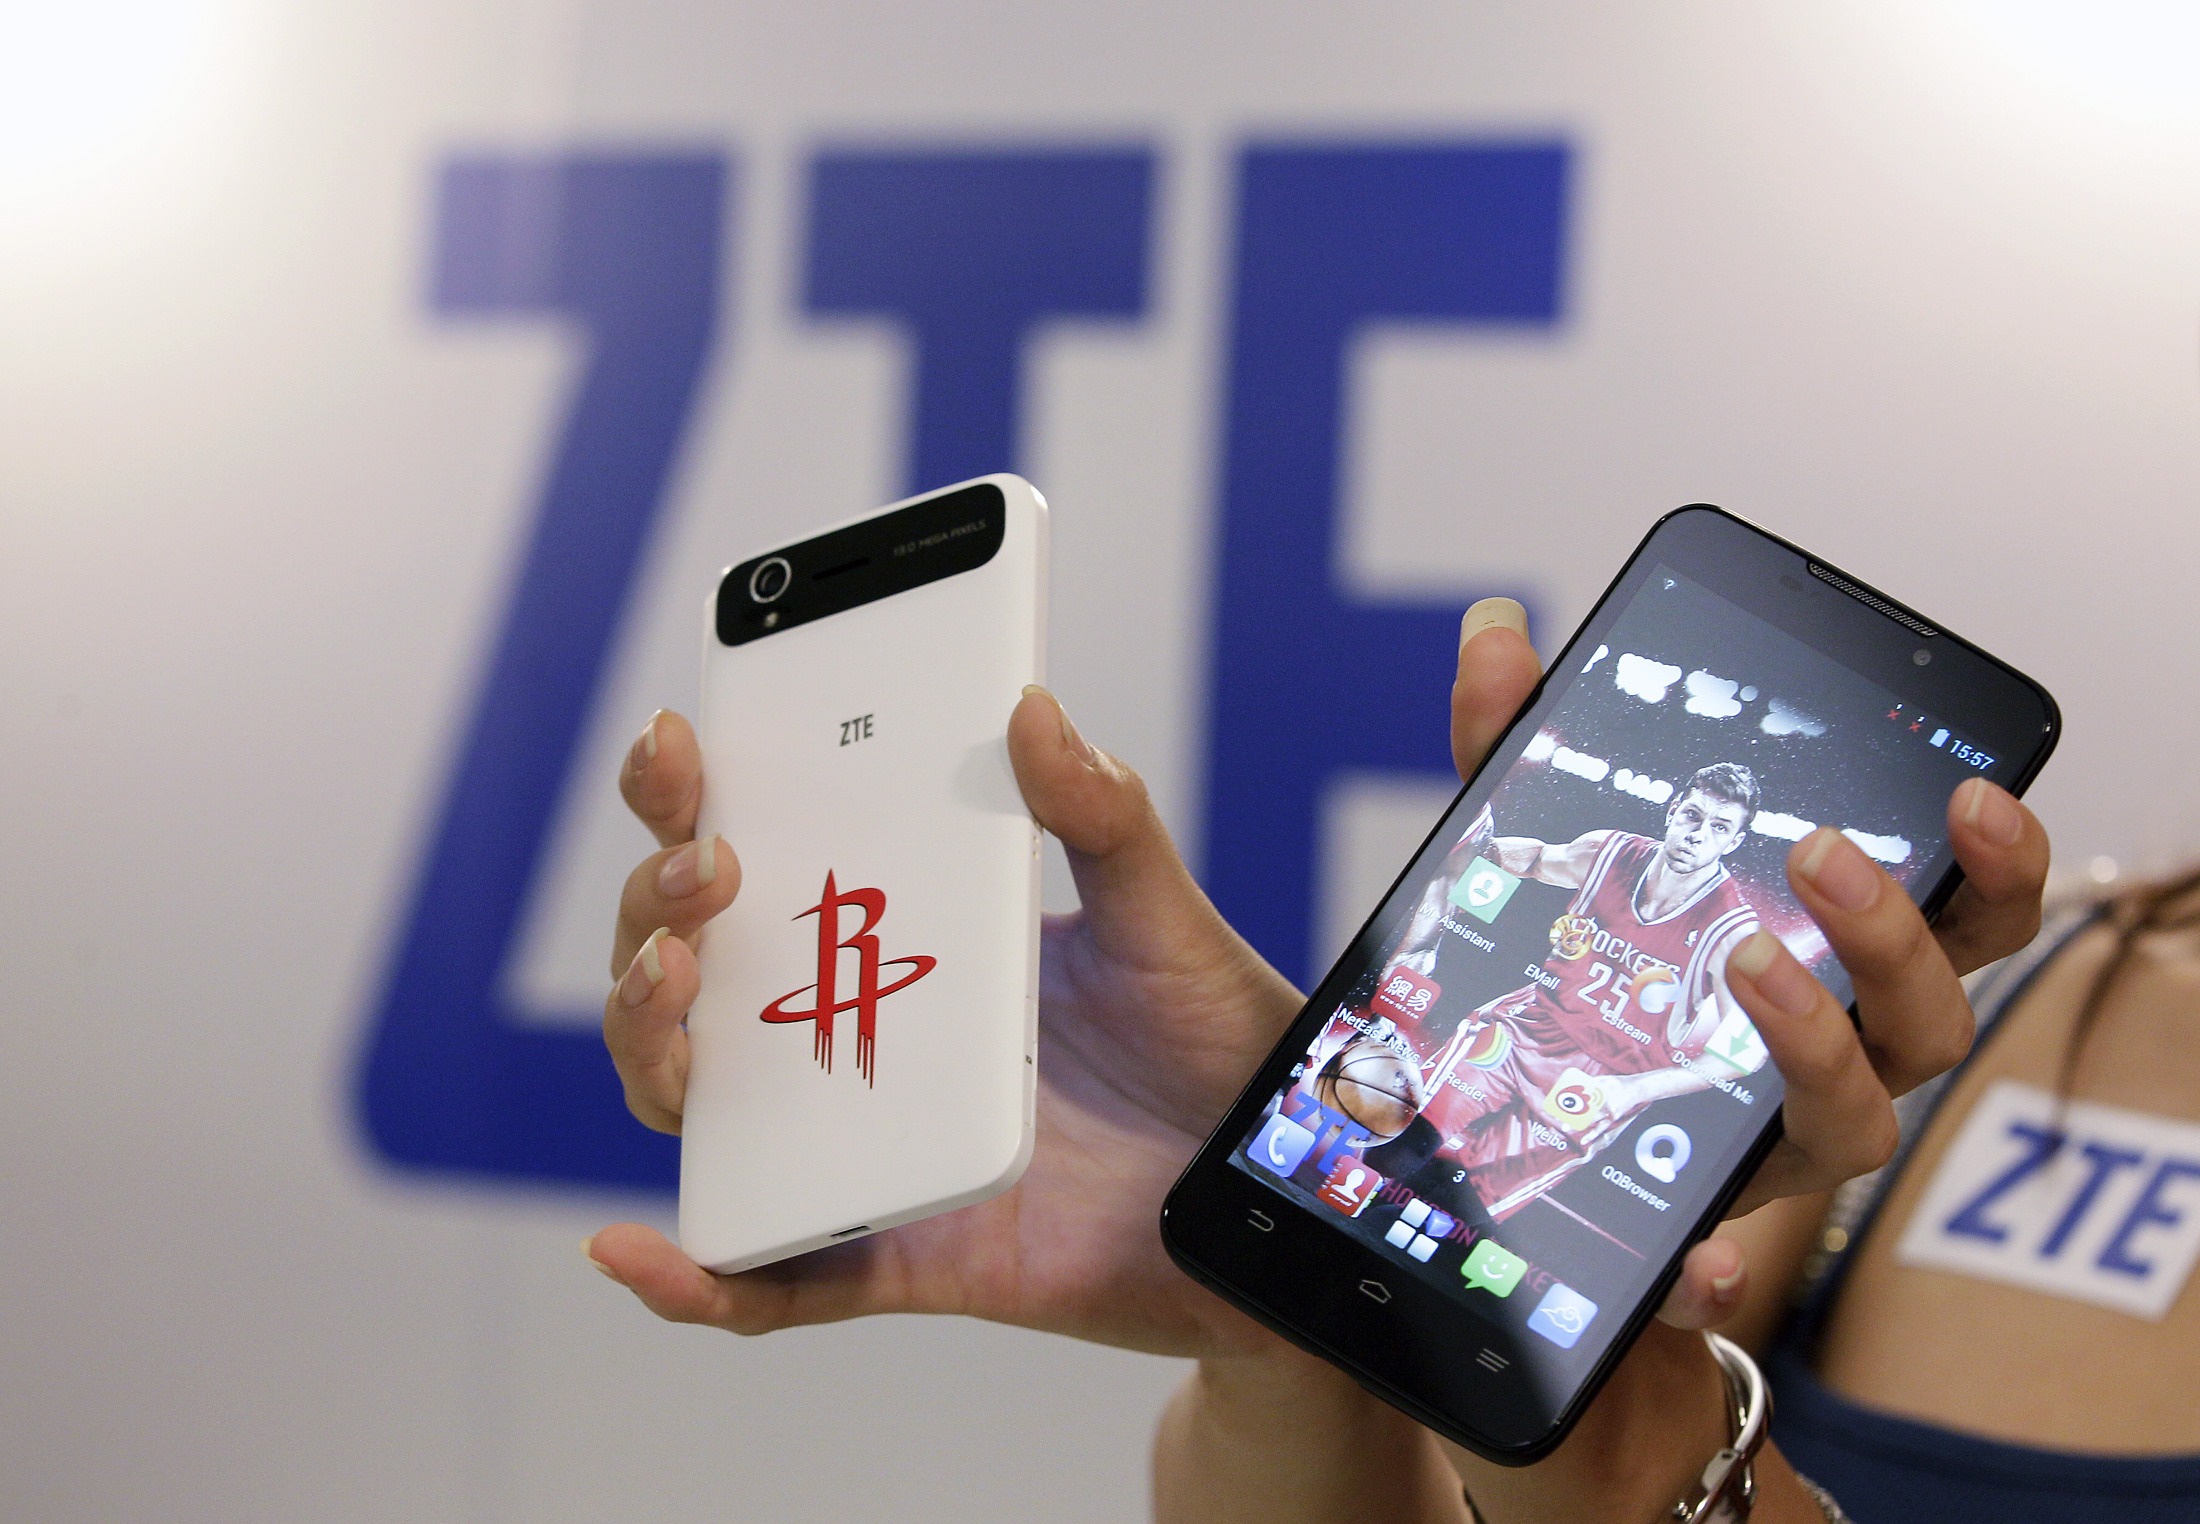 Shenzhen-based ZTE is the country’s largest listed telecommunications equipment manufacturer. Photo: Reuters